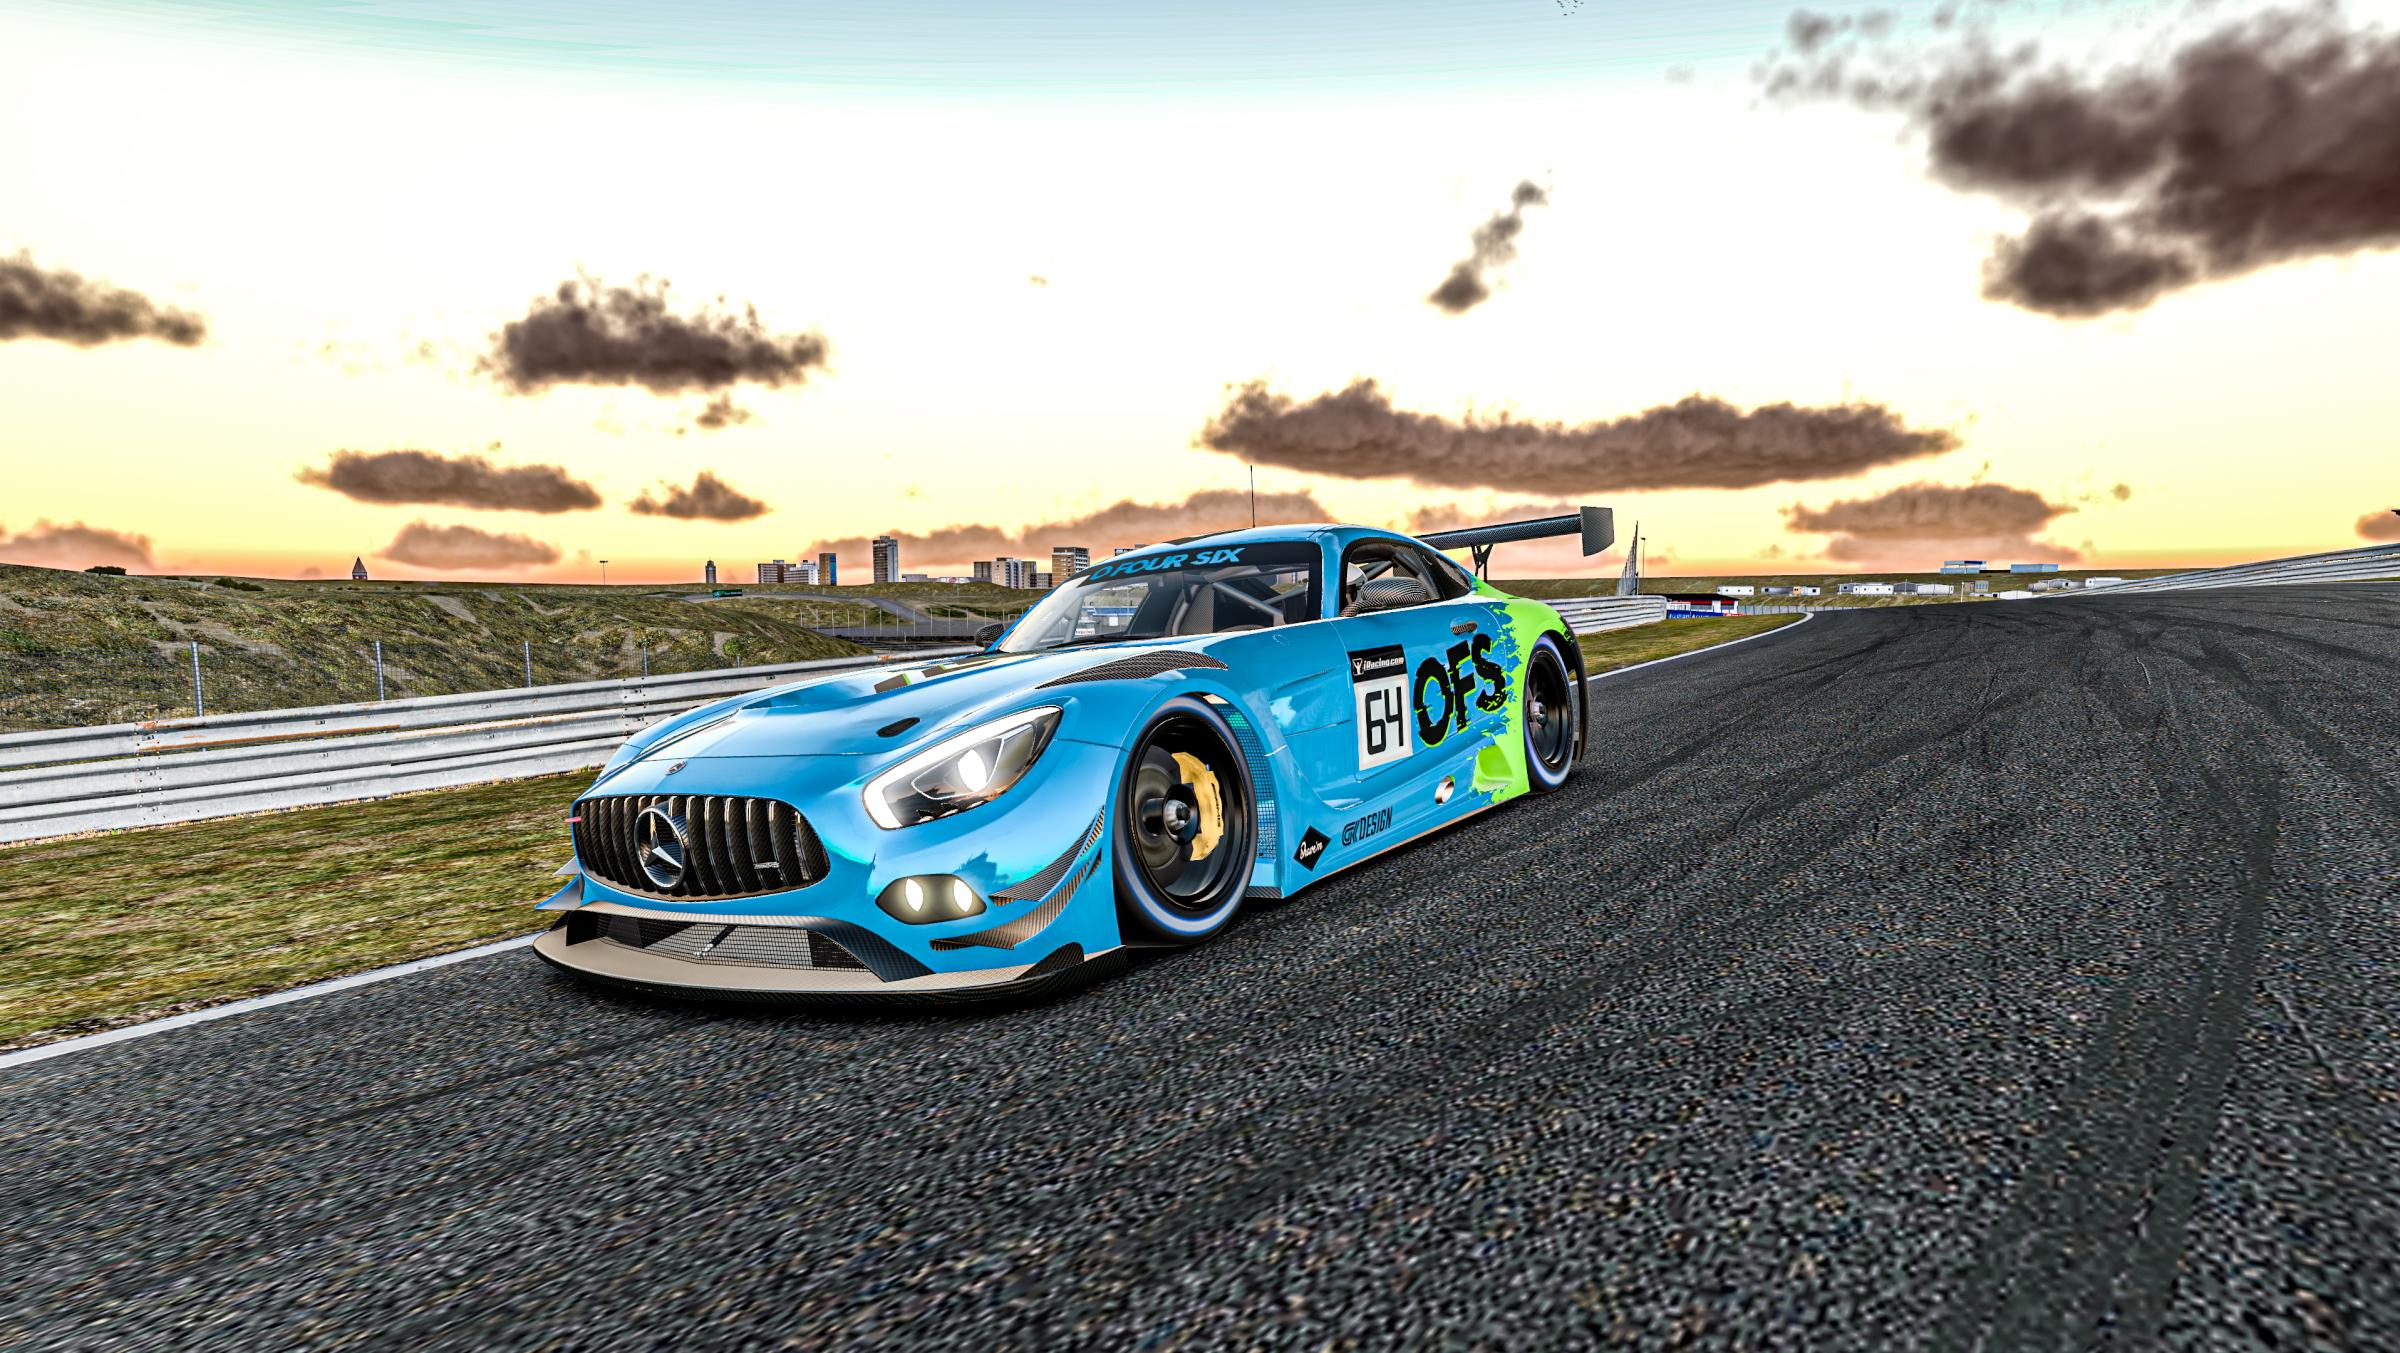 Preview of O Four Six 2022 Livery - Mercedes AMG GT3 by Gino Kelleners